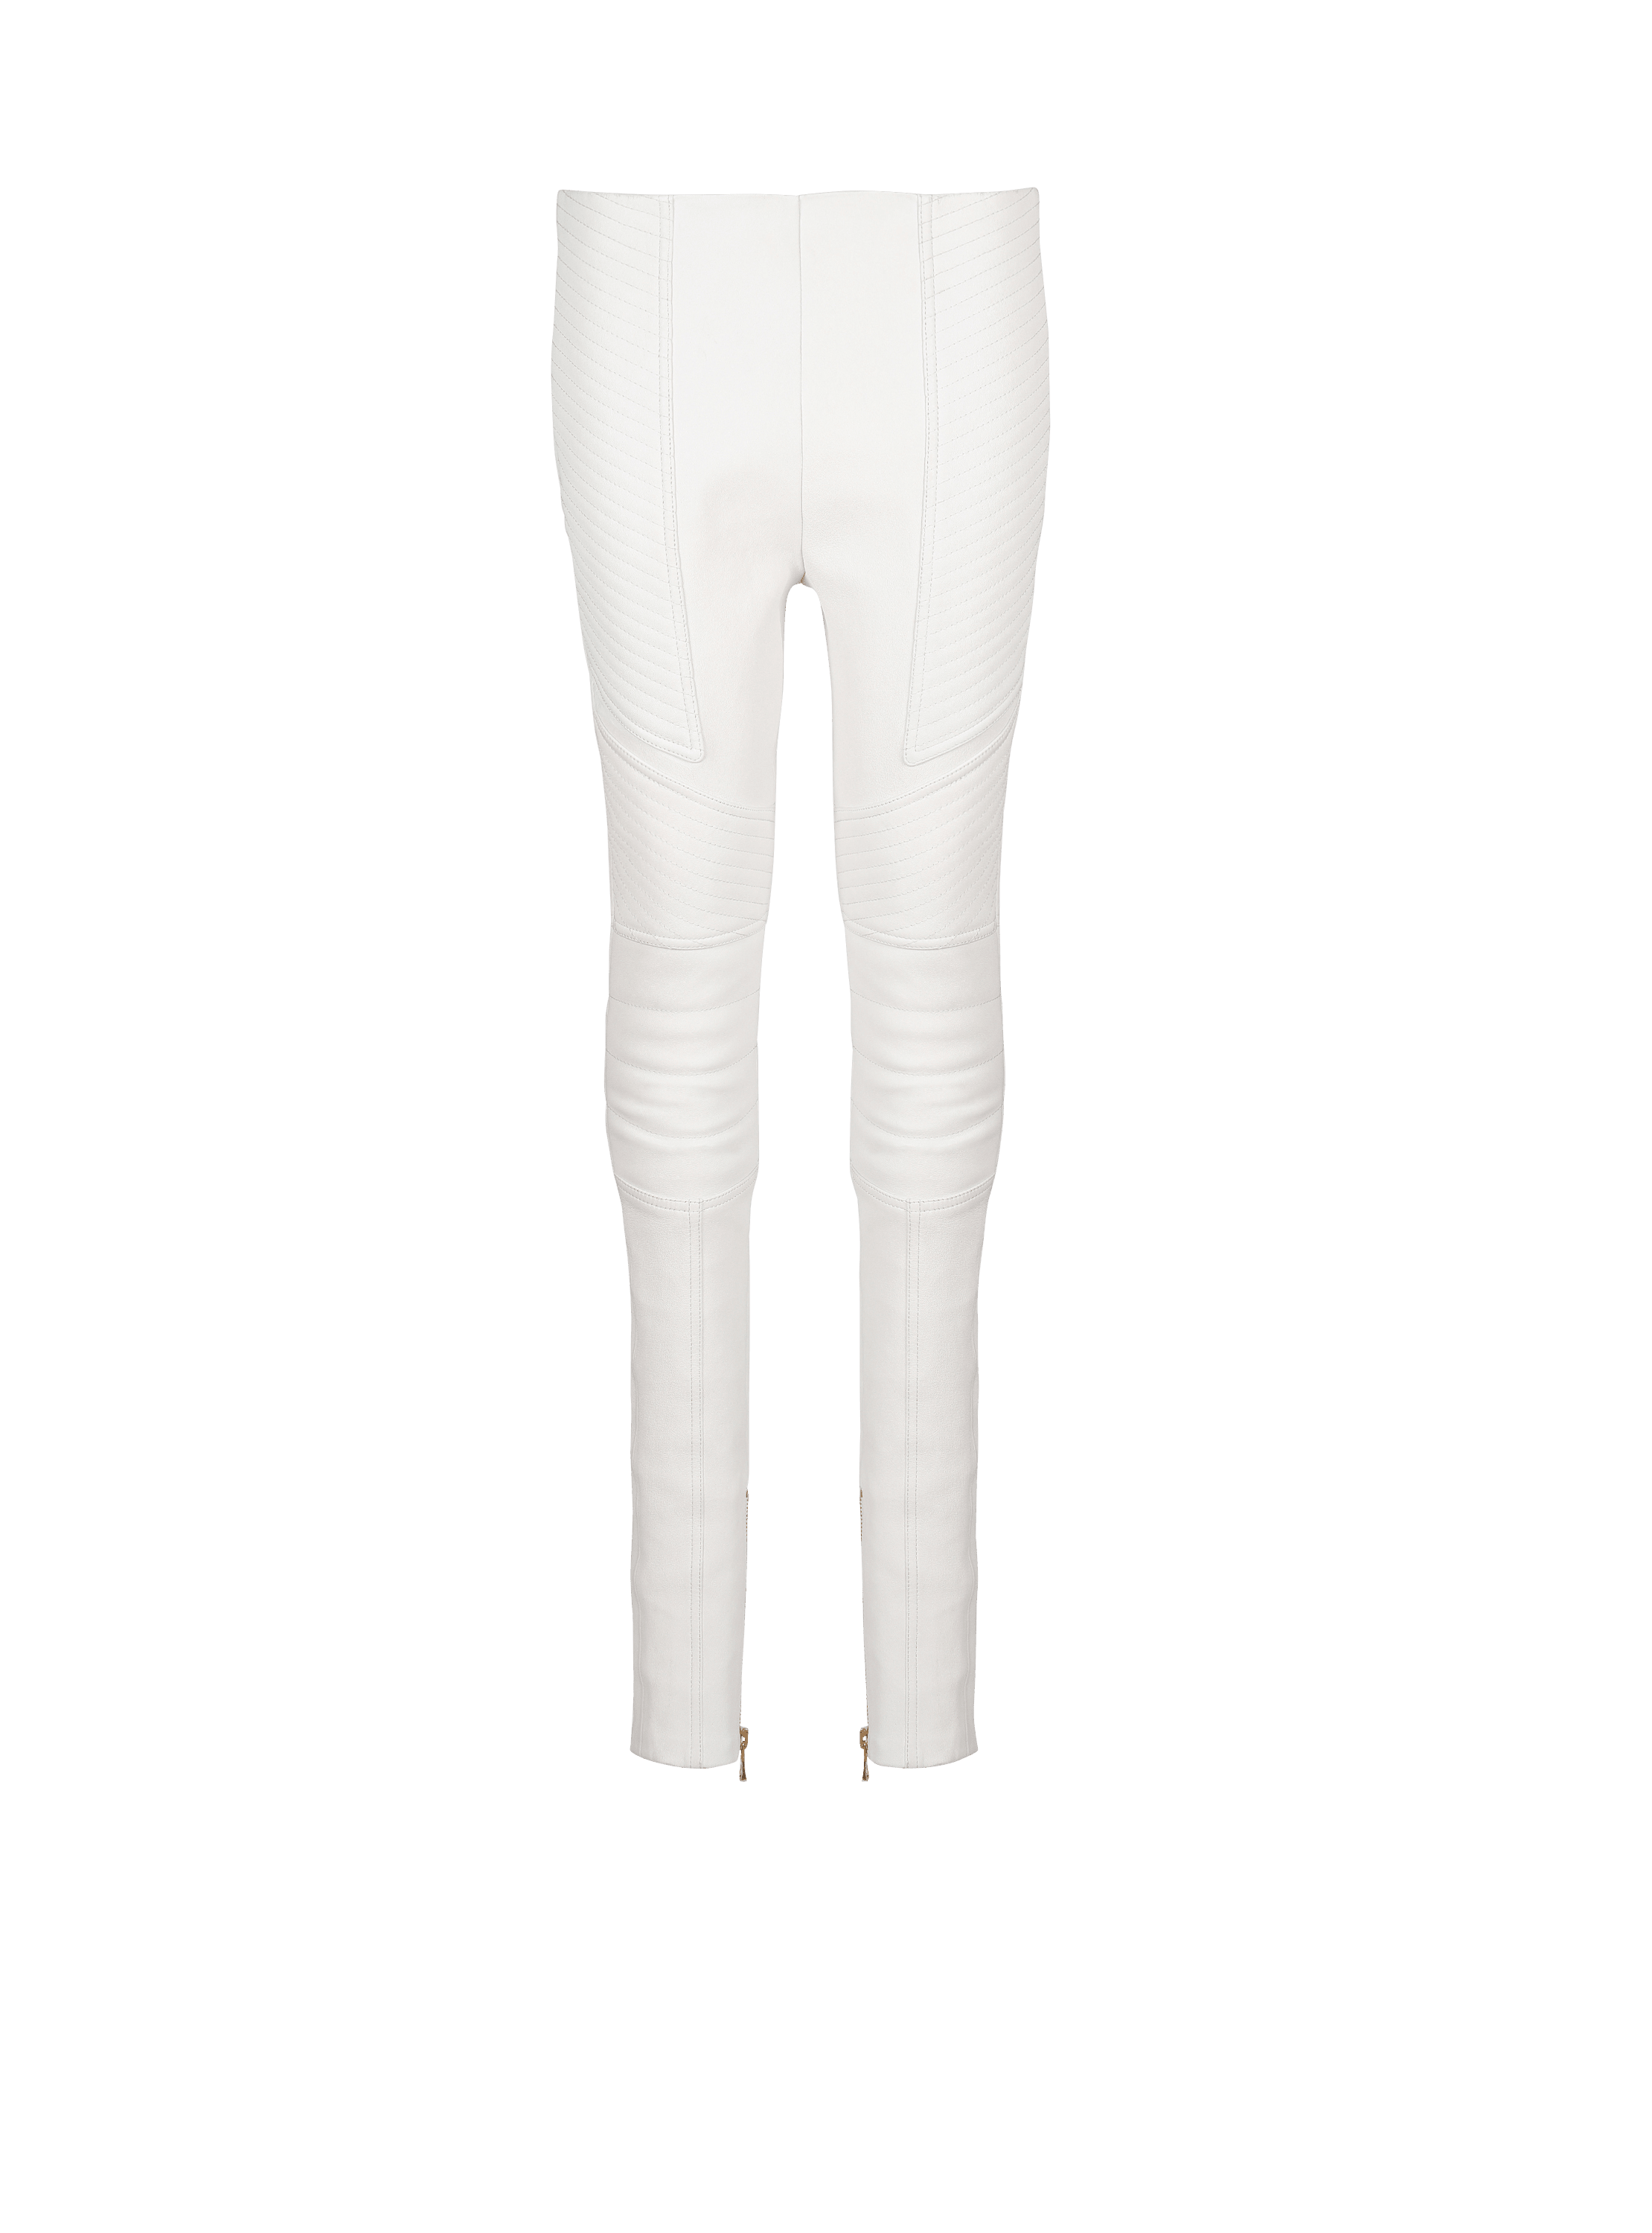 Slim-fit leather trousers